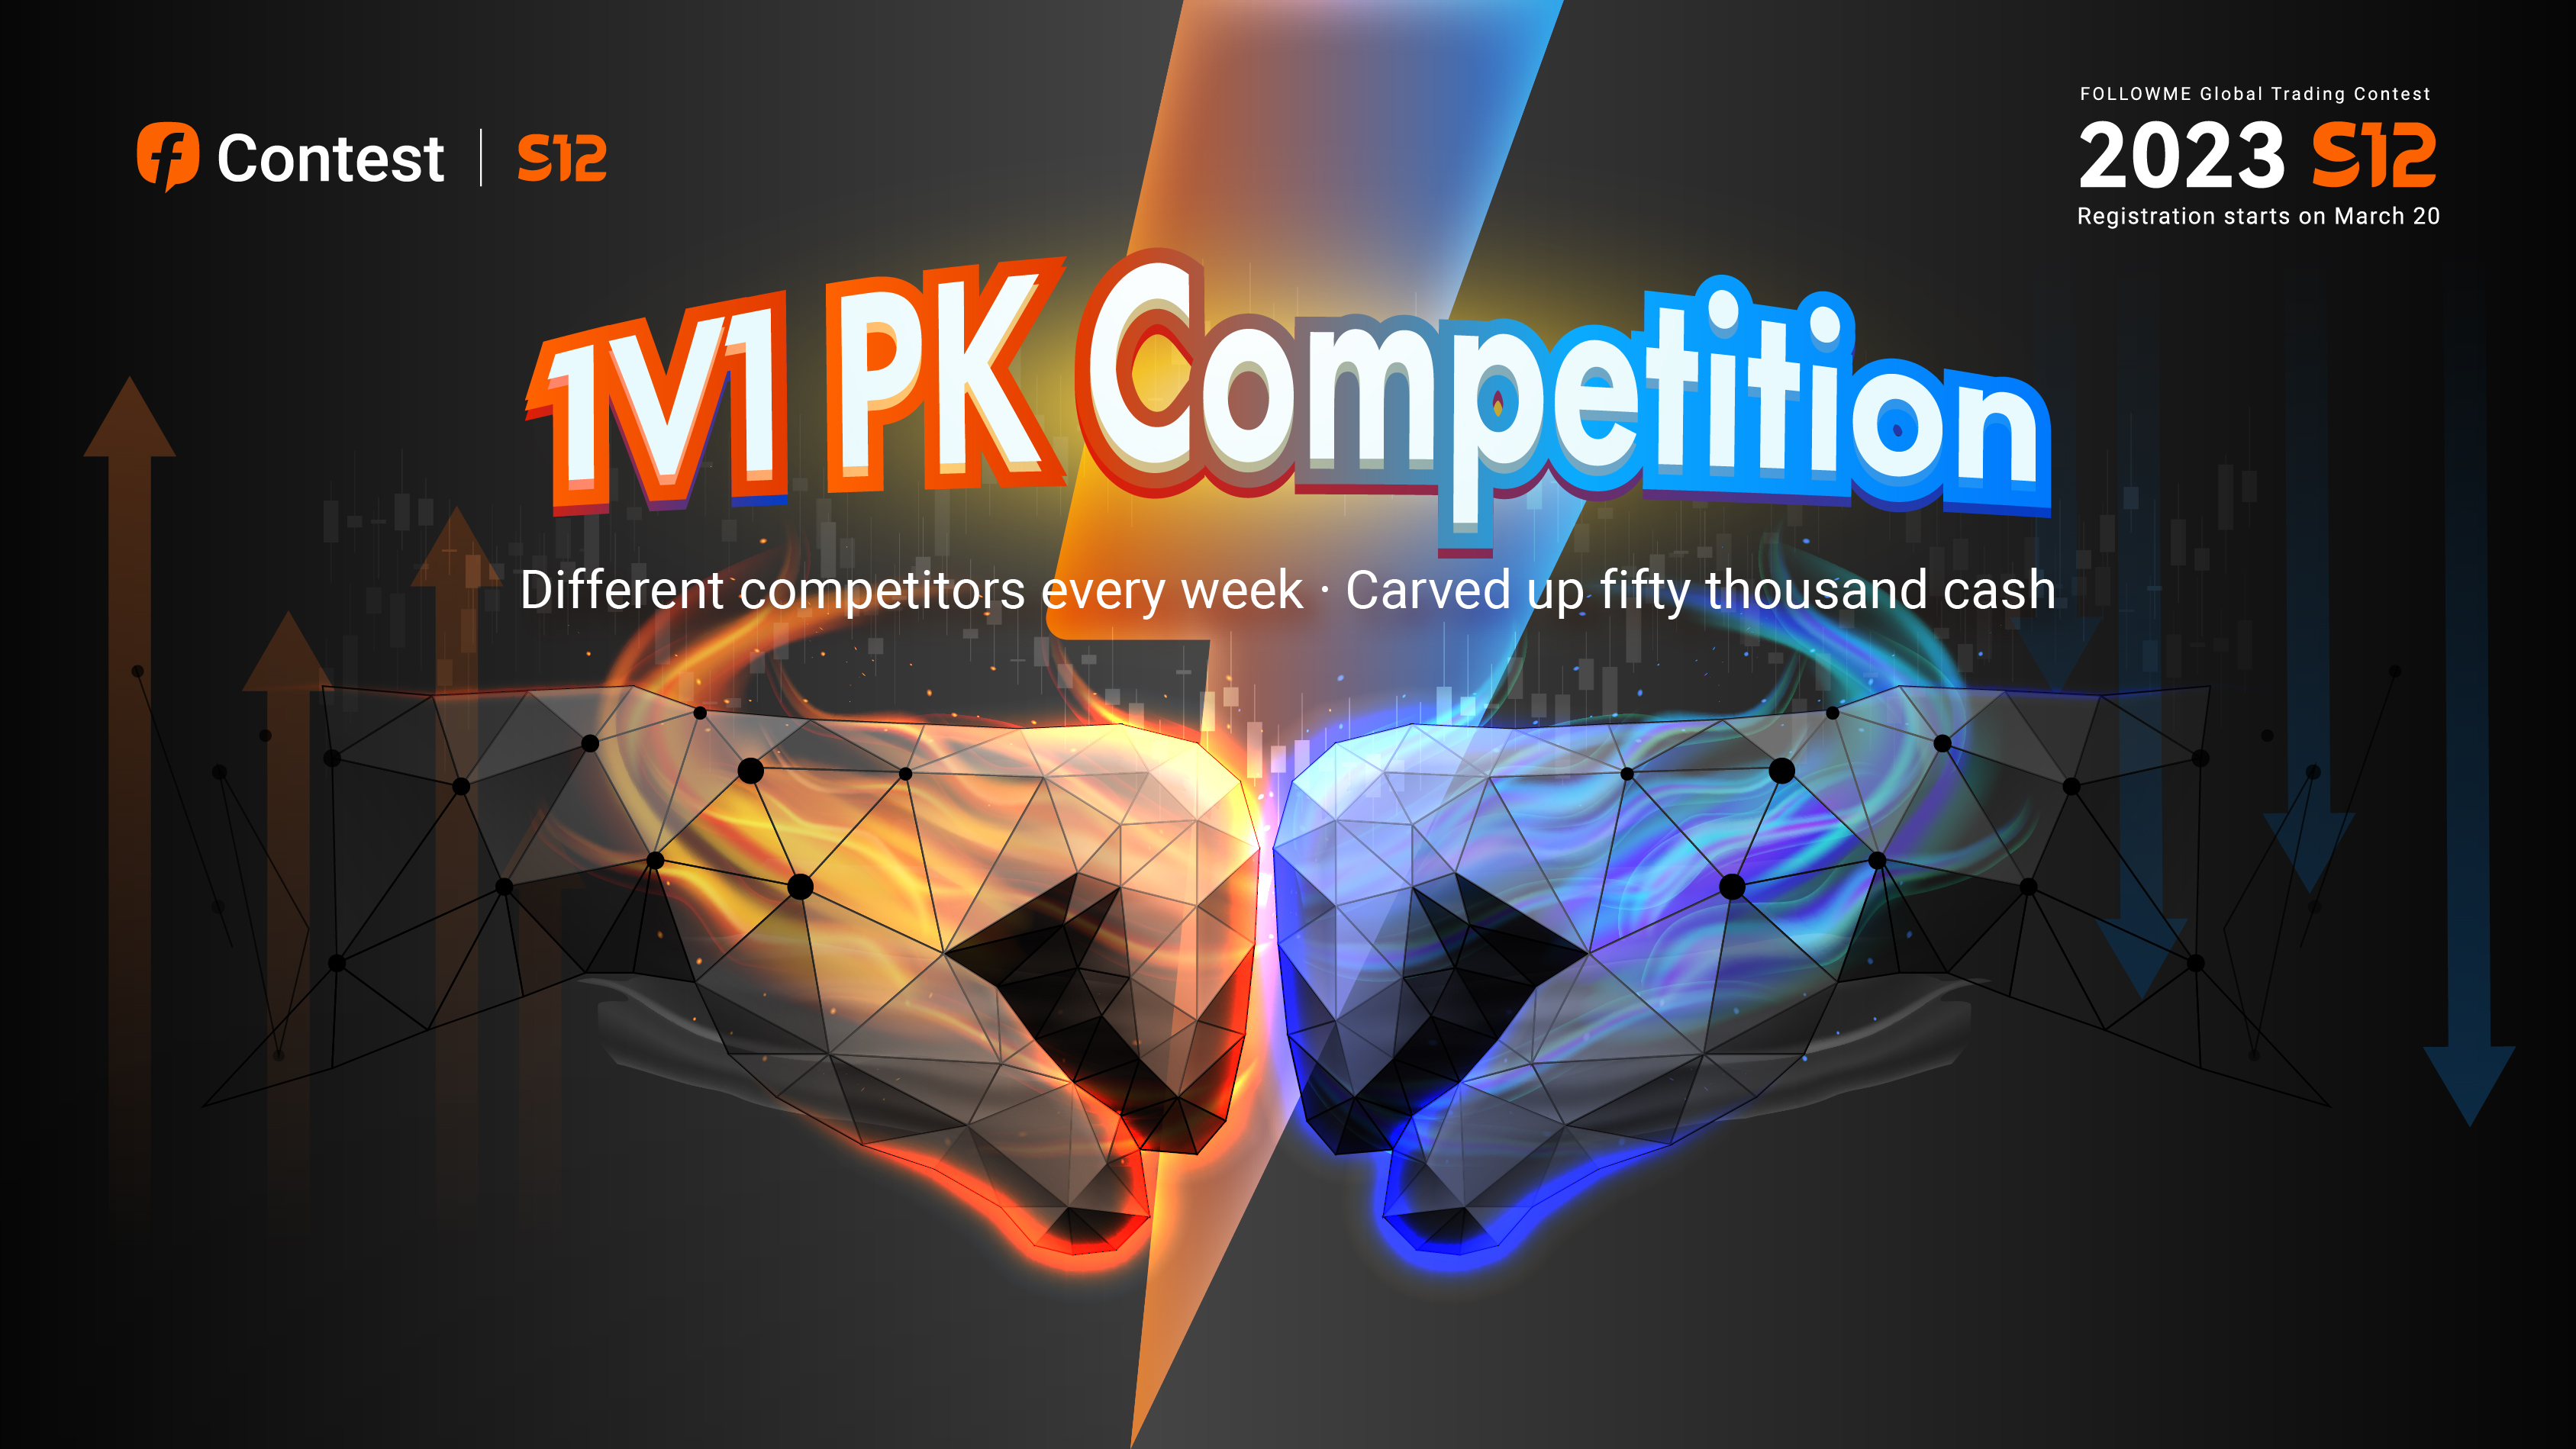 Participate in 1 V 1 PK Competition and Carve Up Over $7,000 in CASH